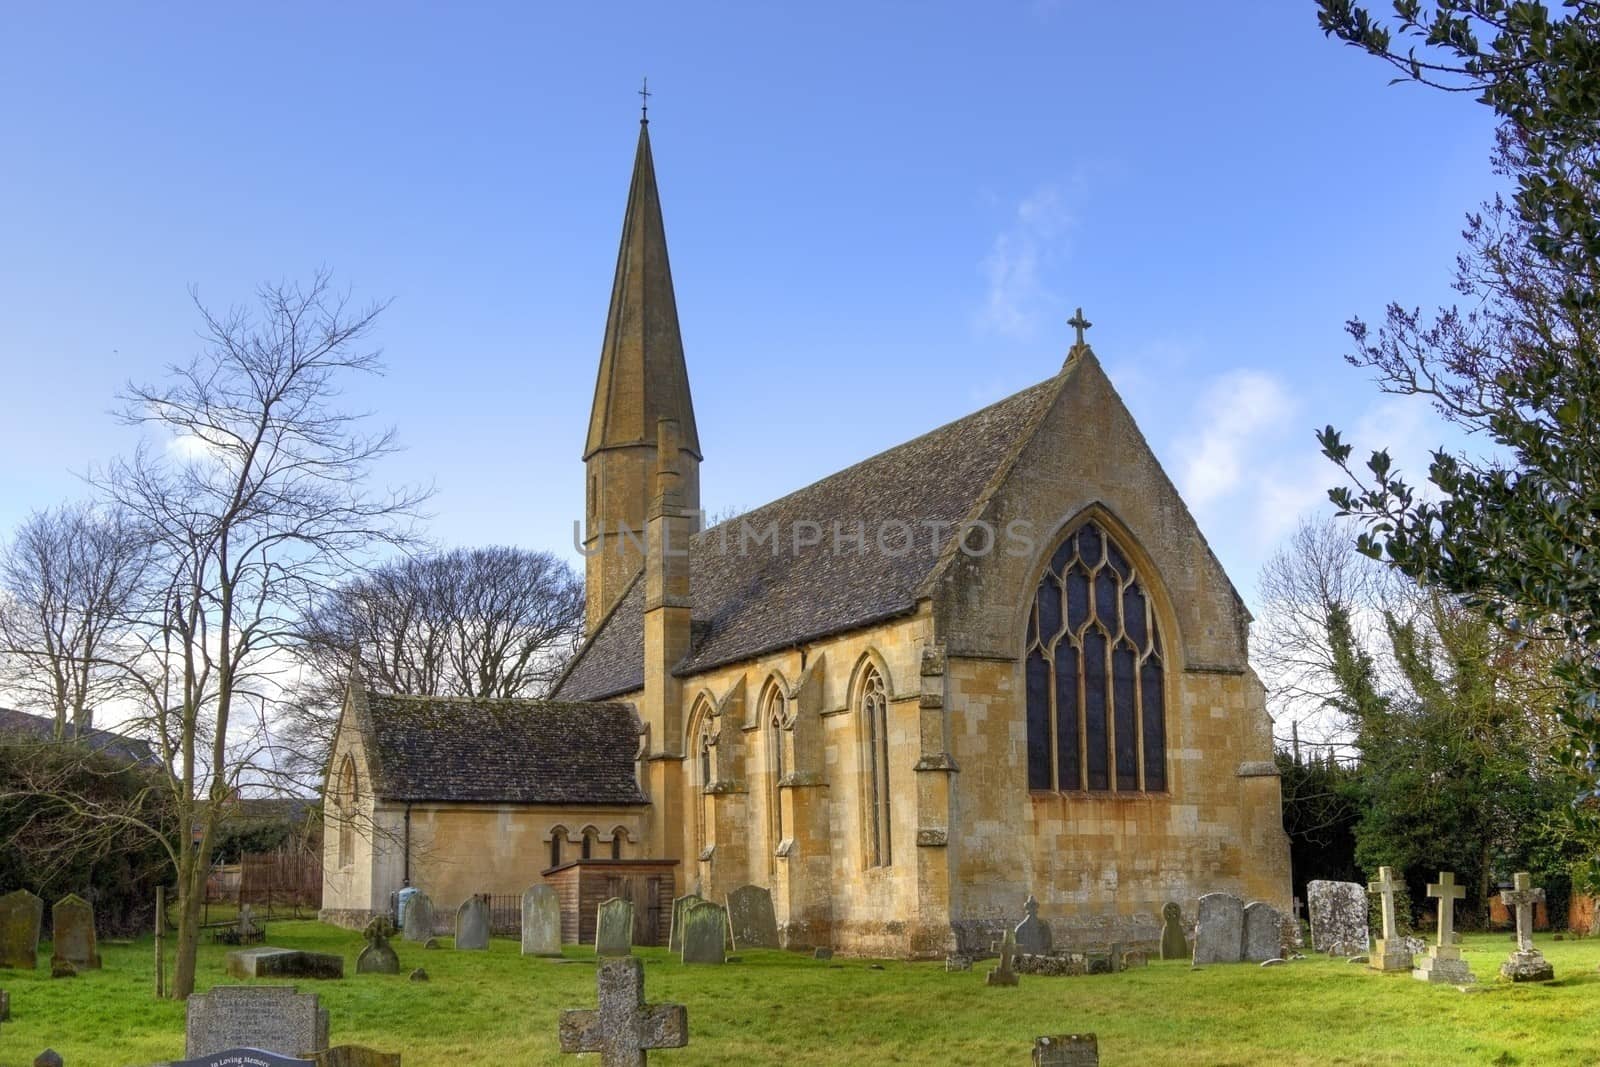 Small Cotswold stone church at Sedgeberrow, Worcestershire, England.